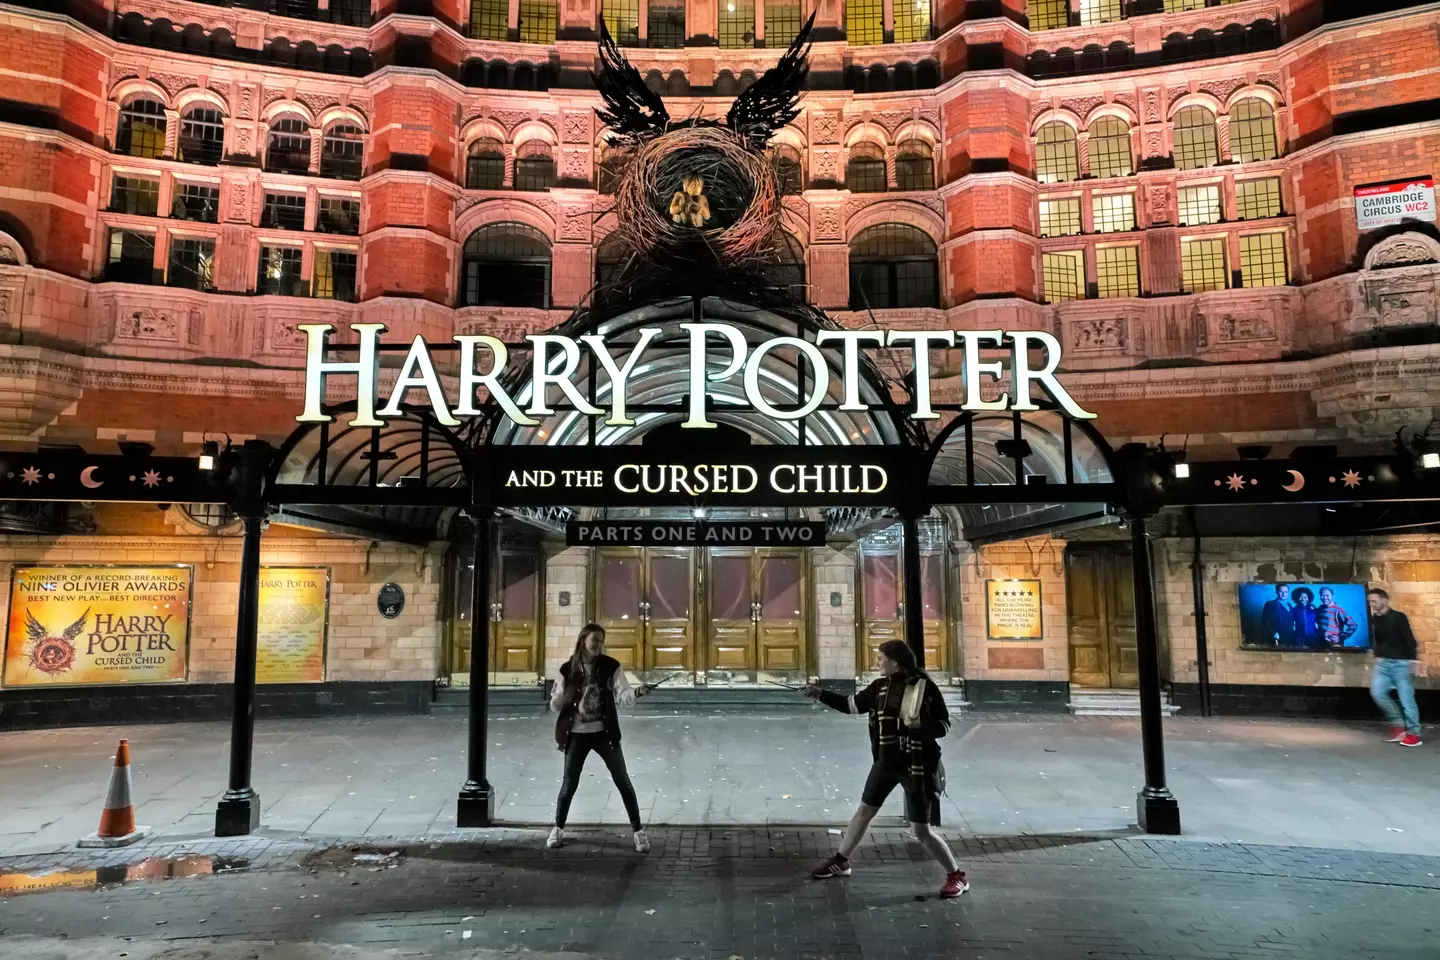 Tom jokingly suggested another musical may even come out of the Harry Potter franchise called 'Potter The Musical'.